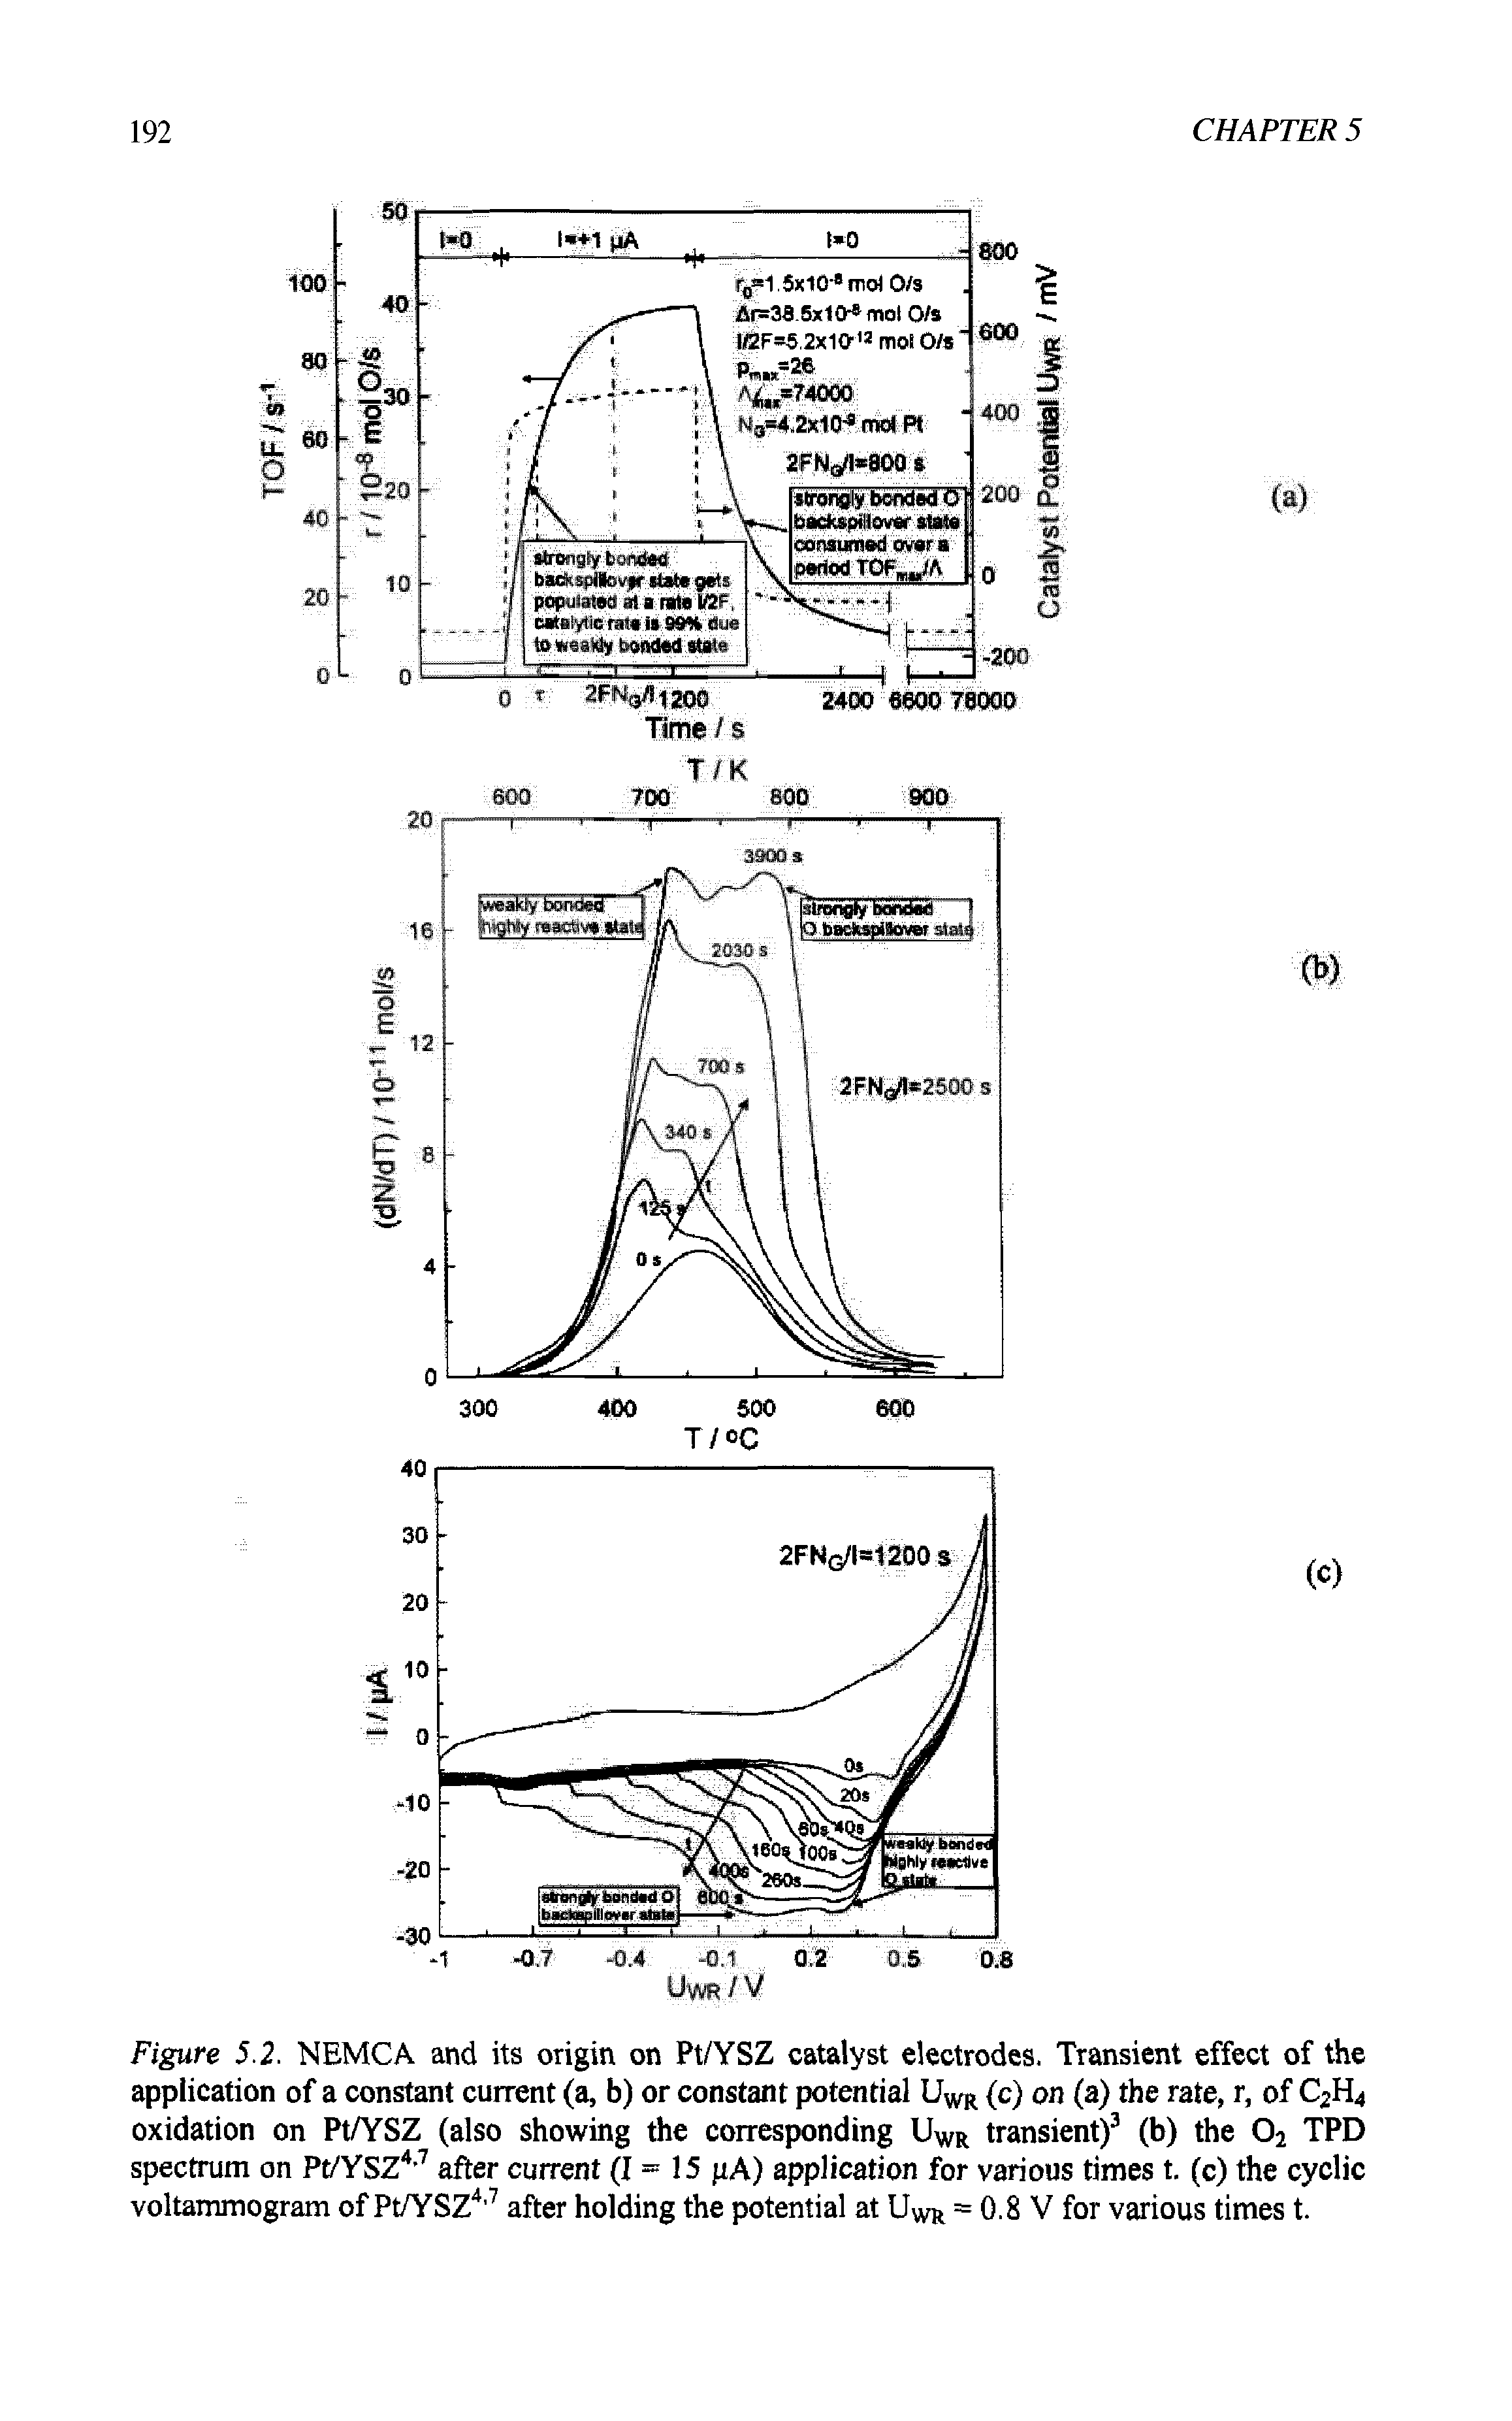 Figure 5.2. NEMCA and its origin on Pt/YSZ catalyst electrodes. Transient effect of the application of a constant current (a, b) or constant potential UWR (c) on (a) the rate, r, of C2H4 oxidation on Pt/YSZ (also showing the corresponding UWR transient)3 (b) the 02 TPD spectrum on Pt/YSZ4,7 after current (1=15 pA) application for various times t. (c) the cyclic voltammogram of Pt/YSZ4,7 after holding the potential at UWR = 0.8 V for various times t.